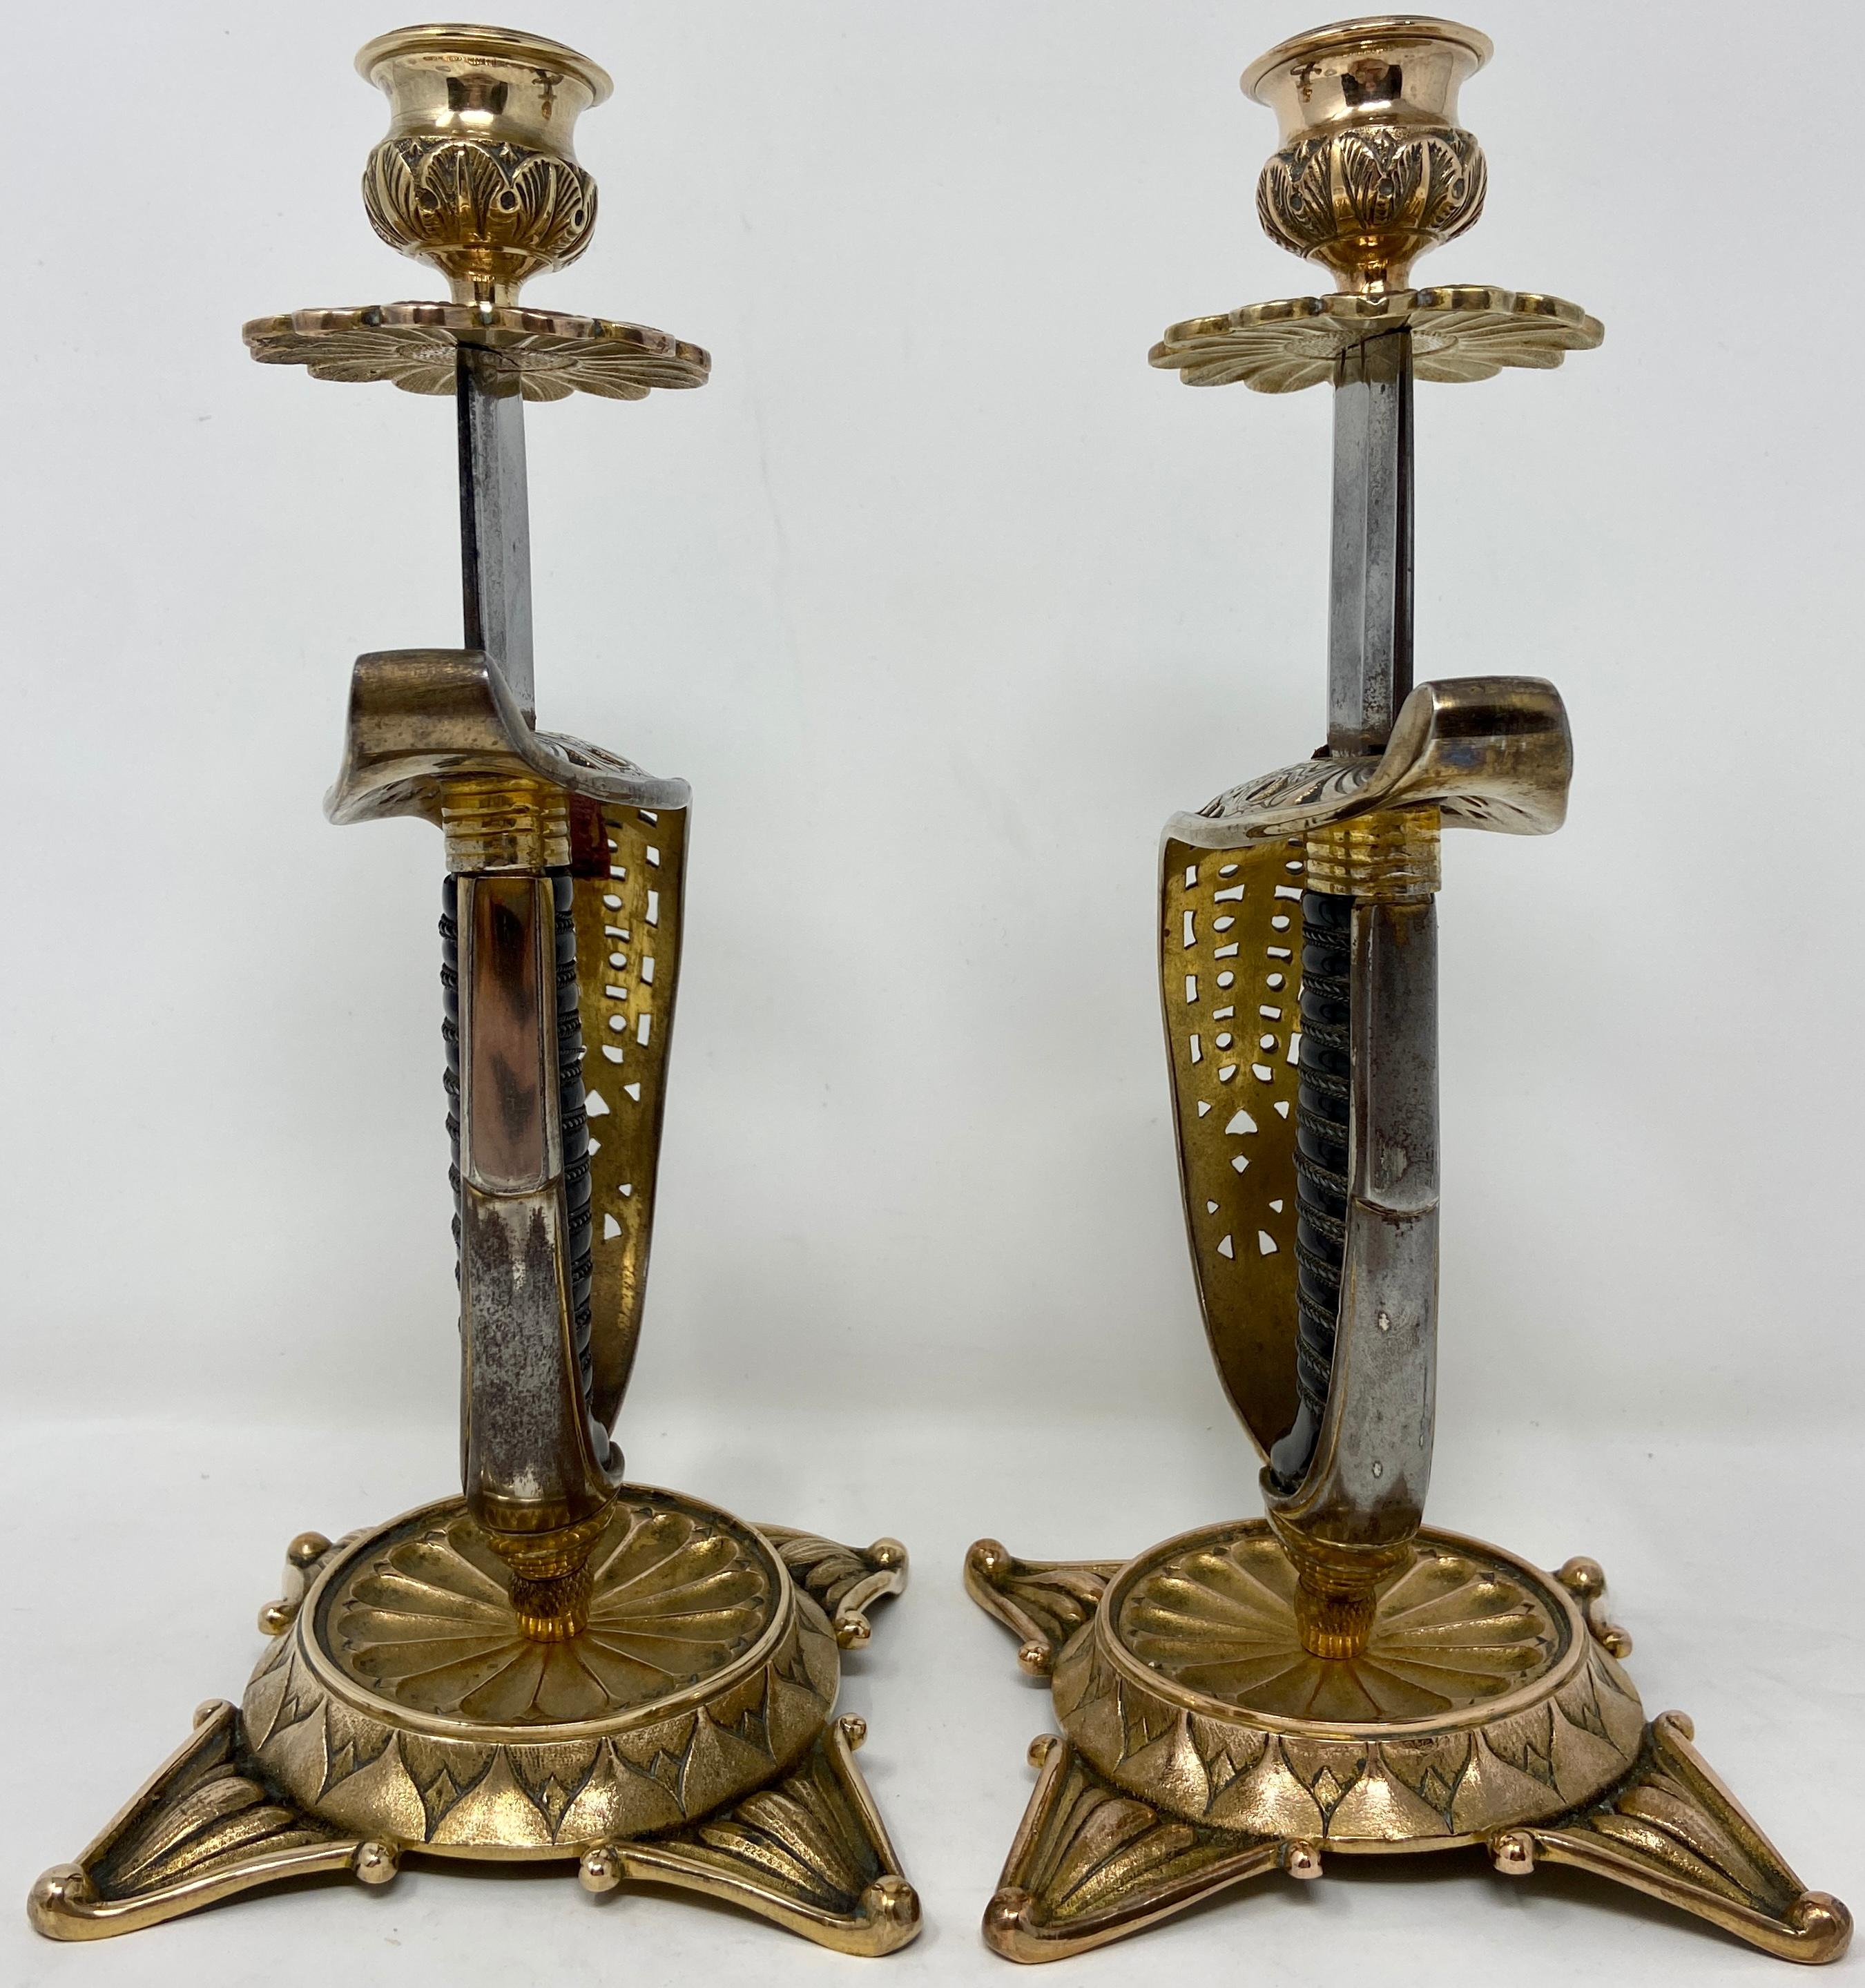 Wonderful Antique 19th century brass and polished steel swords converted into candle sticks, Circa 1860-1870. Beautiful hand-wrought pieces.
Most likely Austrian.